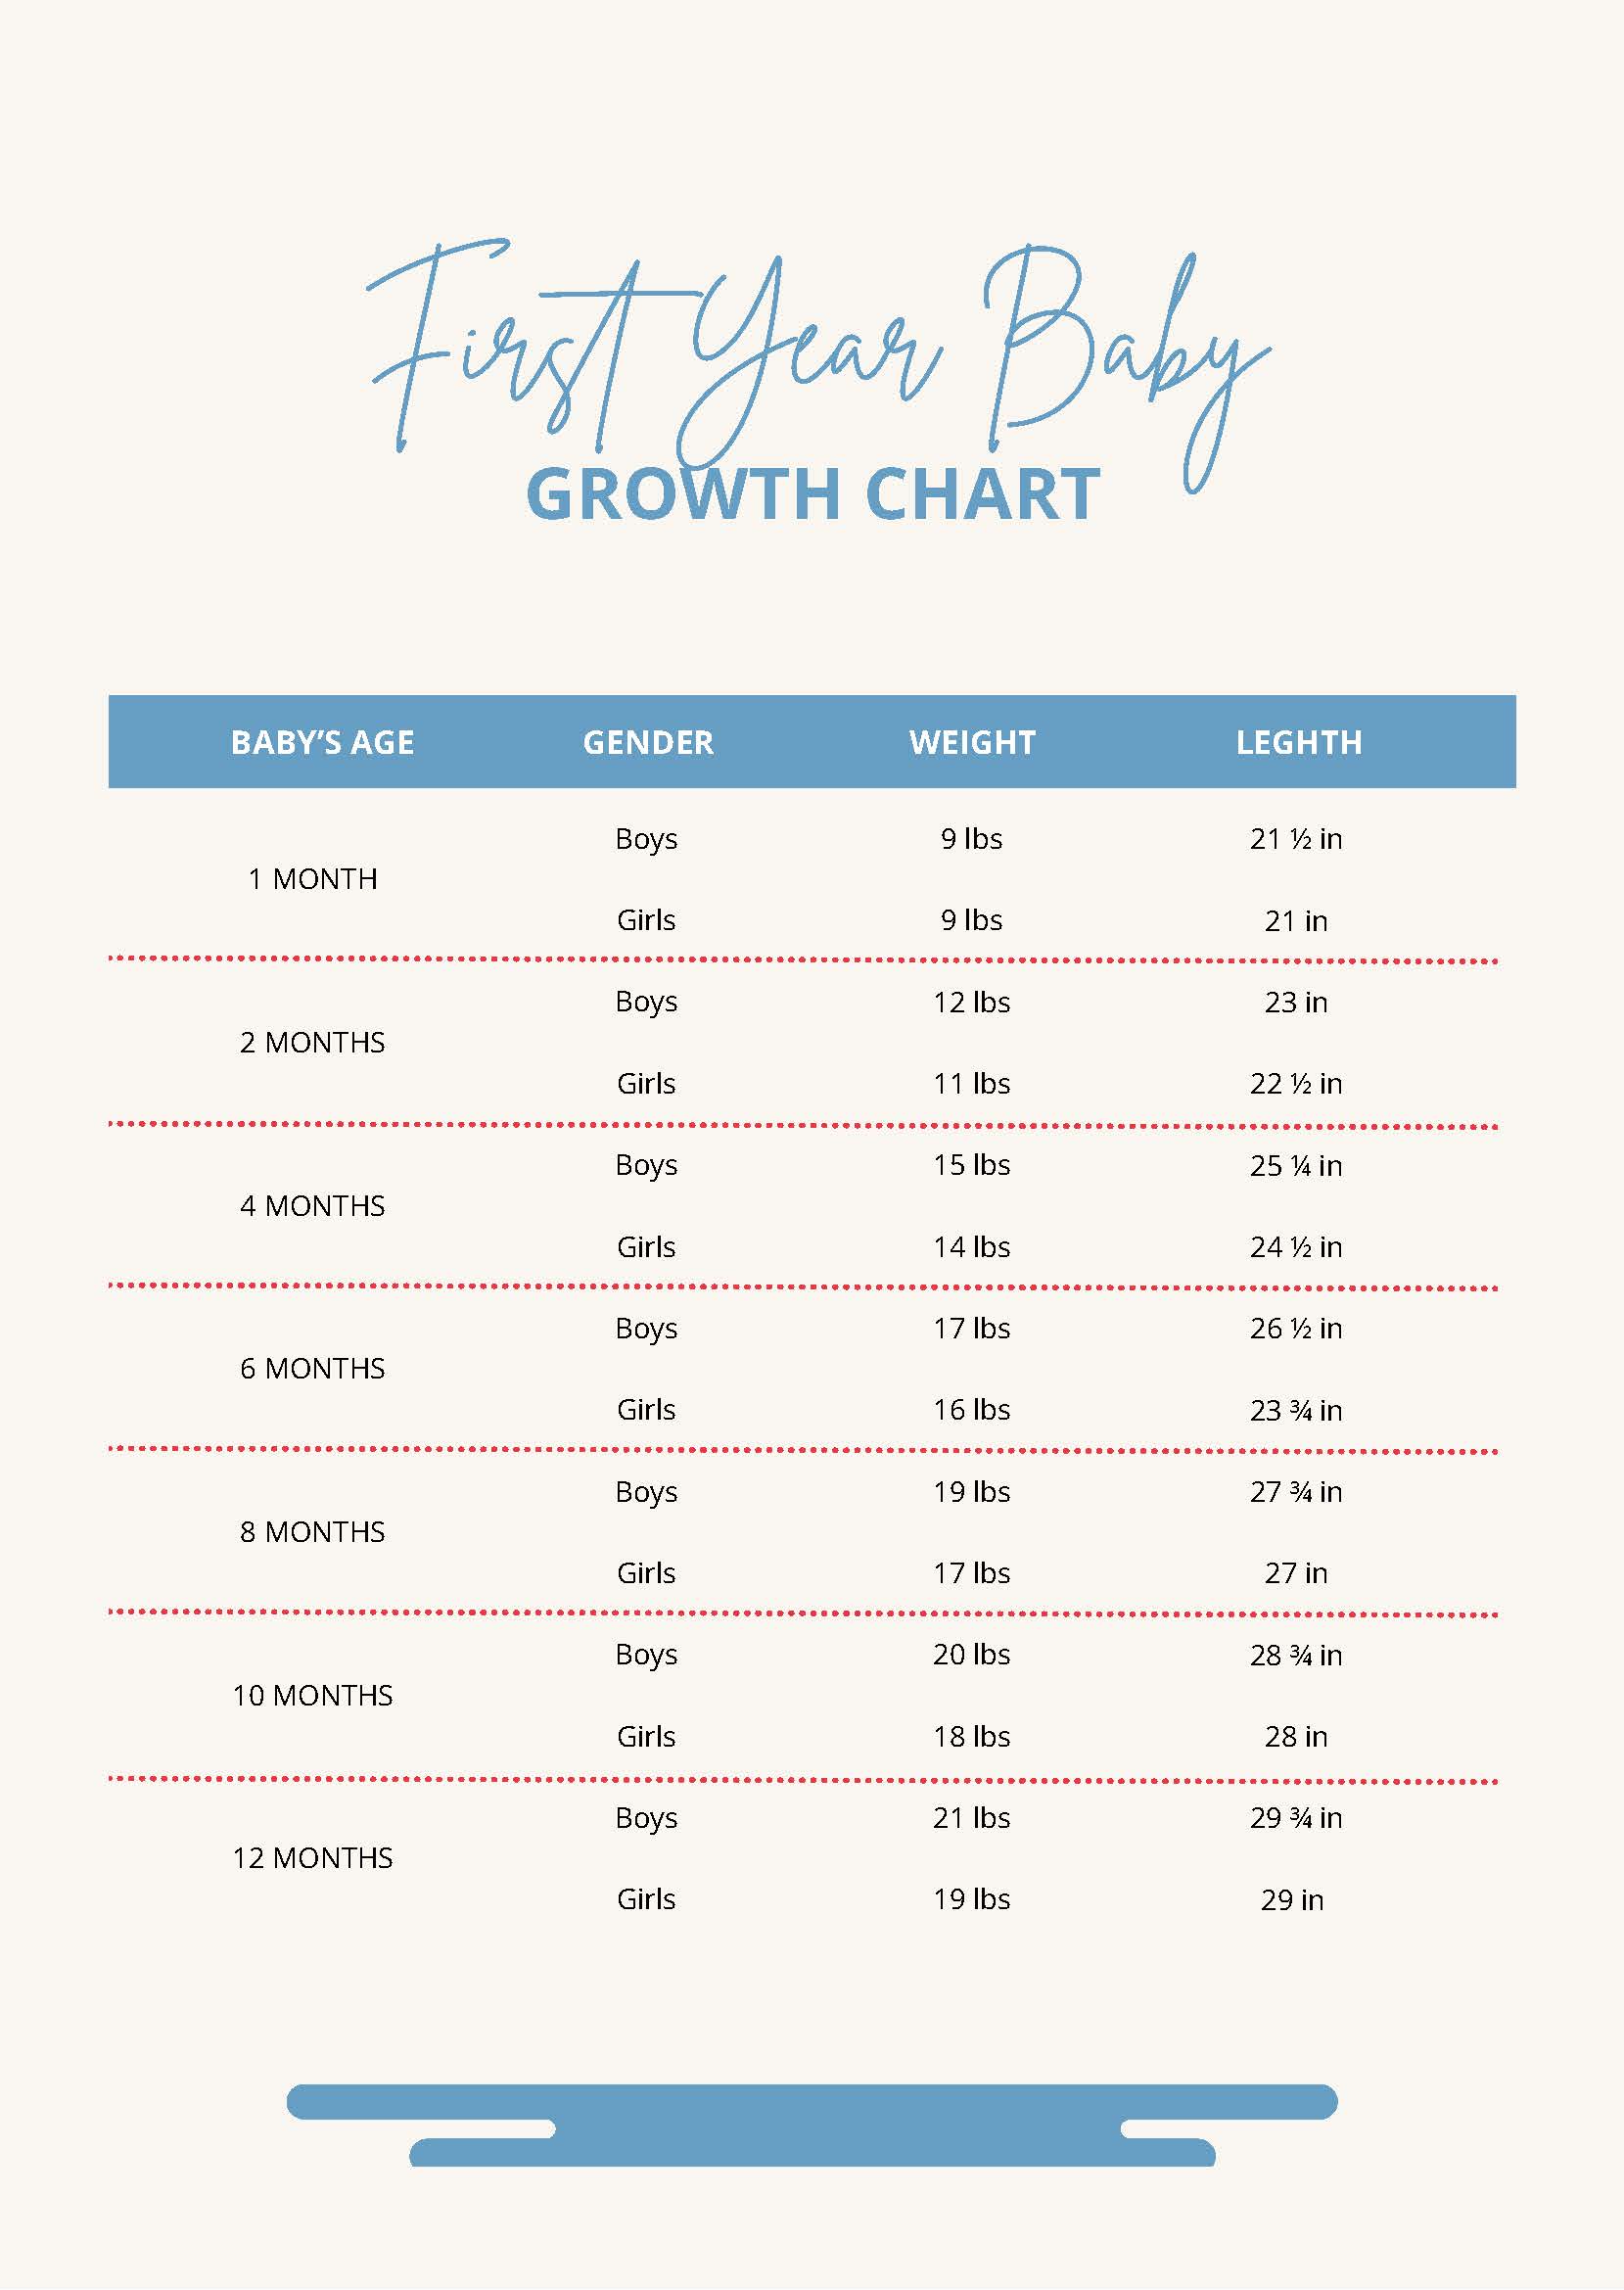 First Year Baby Growth Chart in PDF